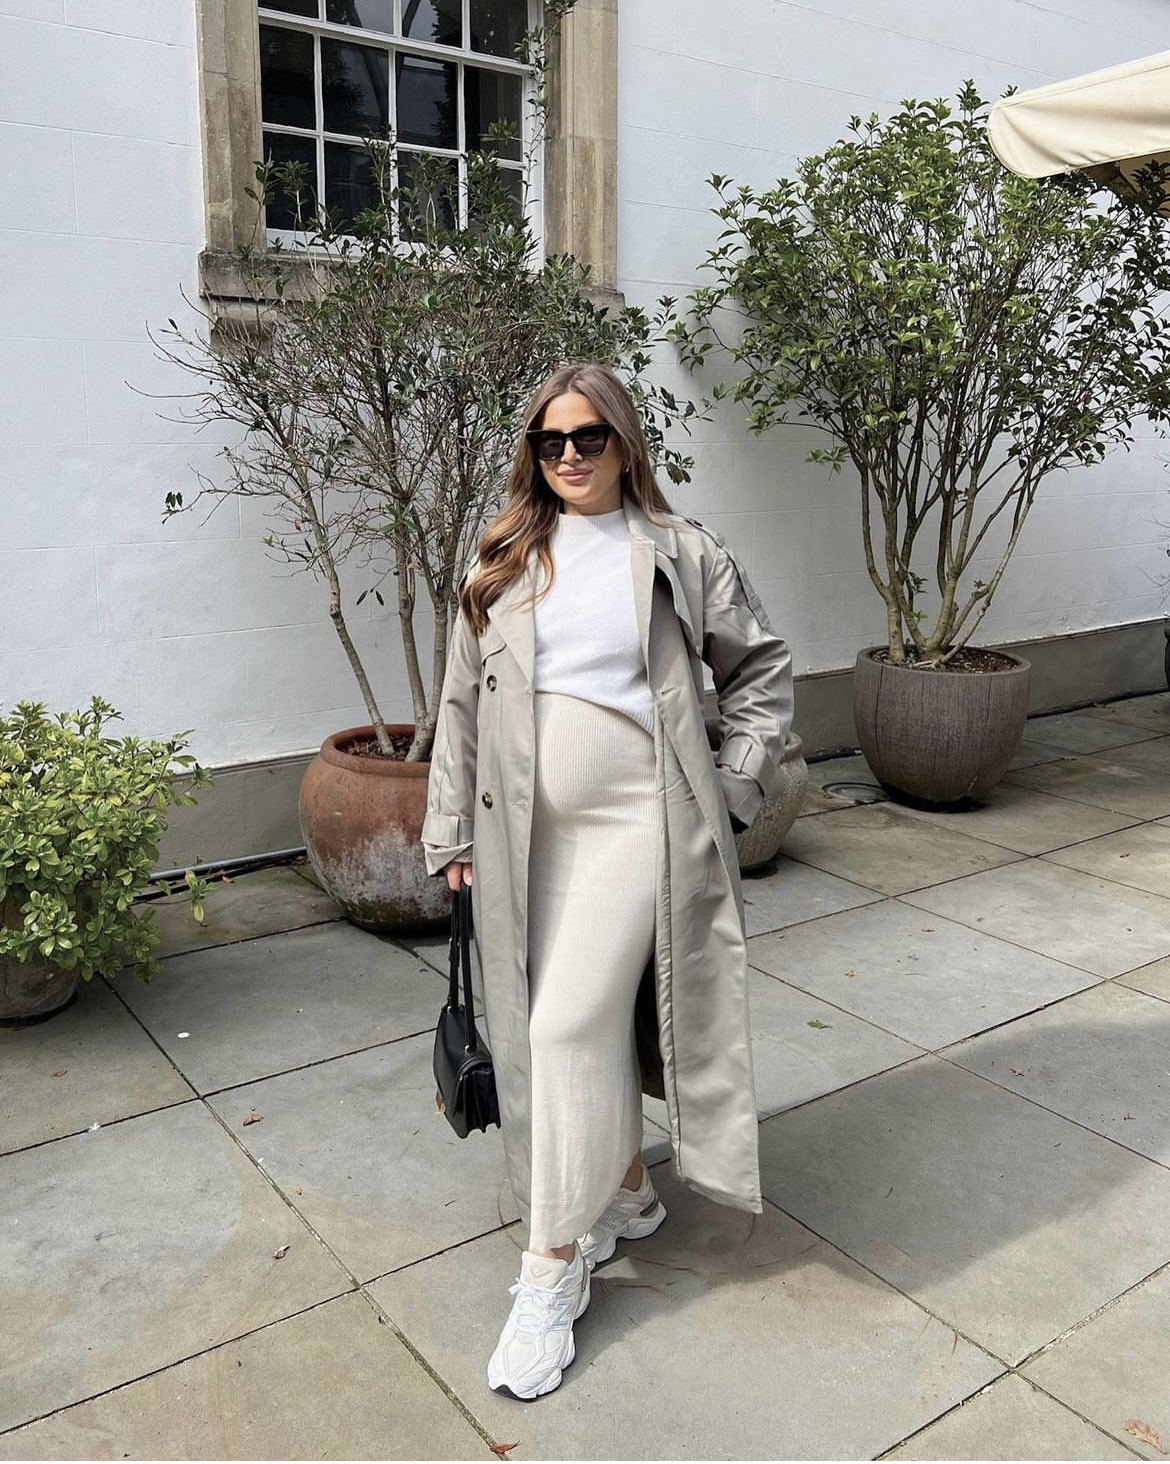 21 Stylish Maternity Outfits You'll Actually Want to Wear